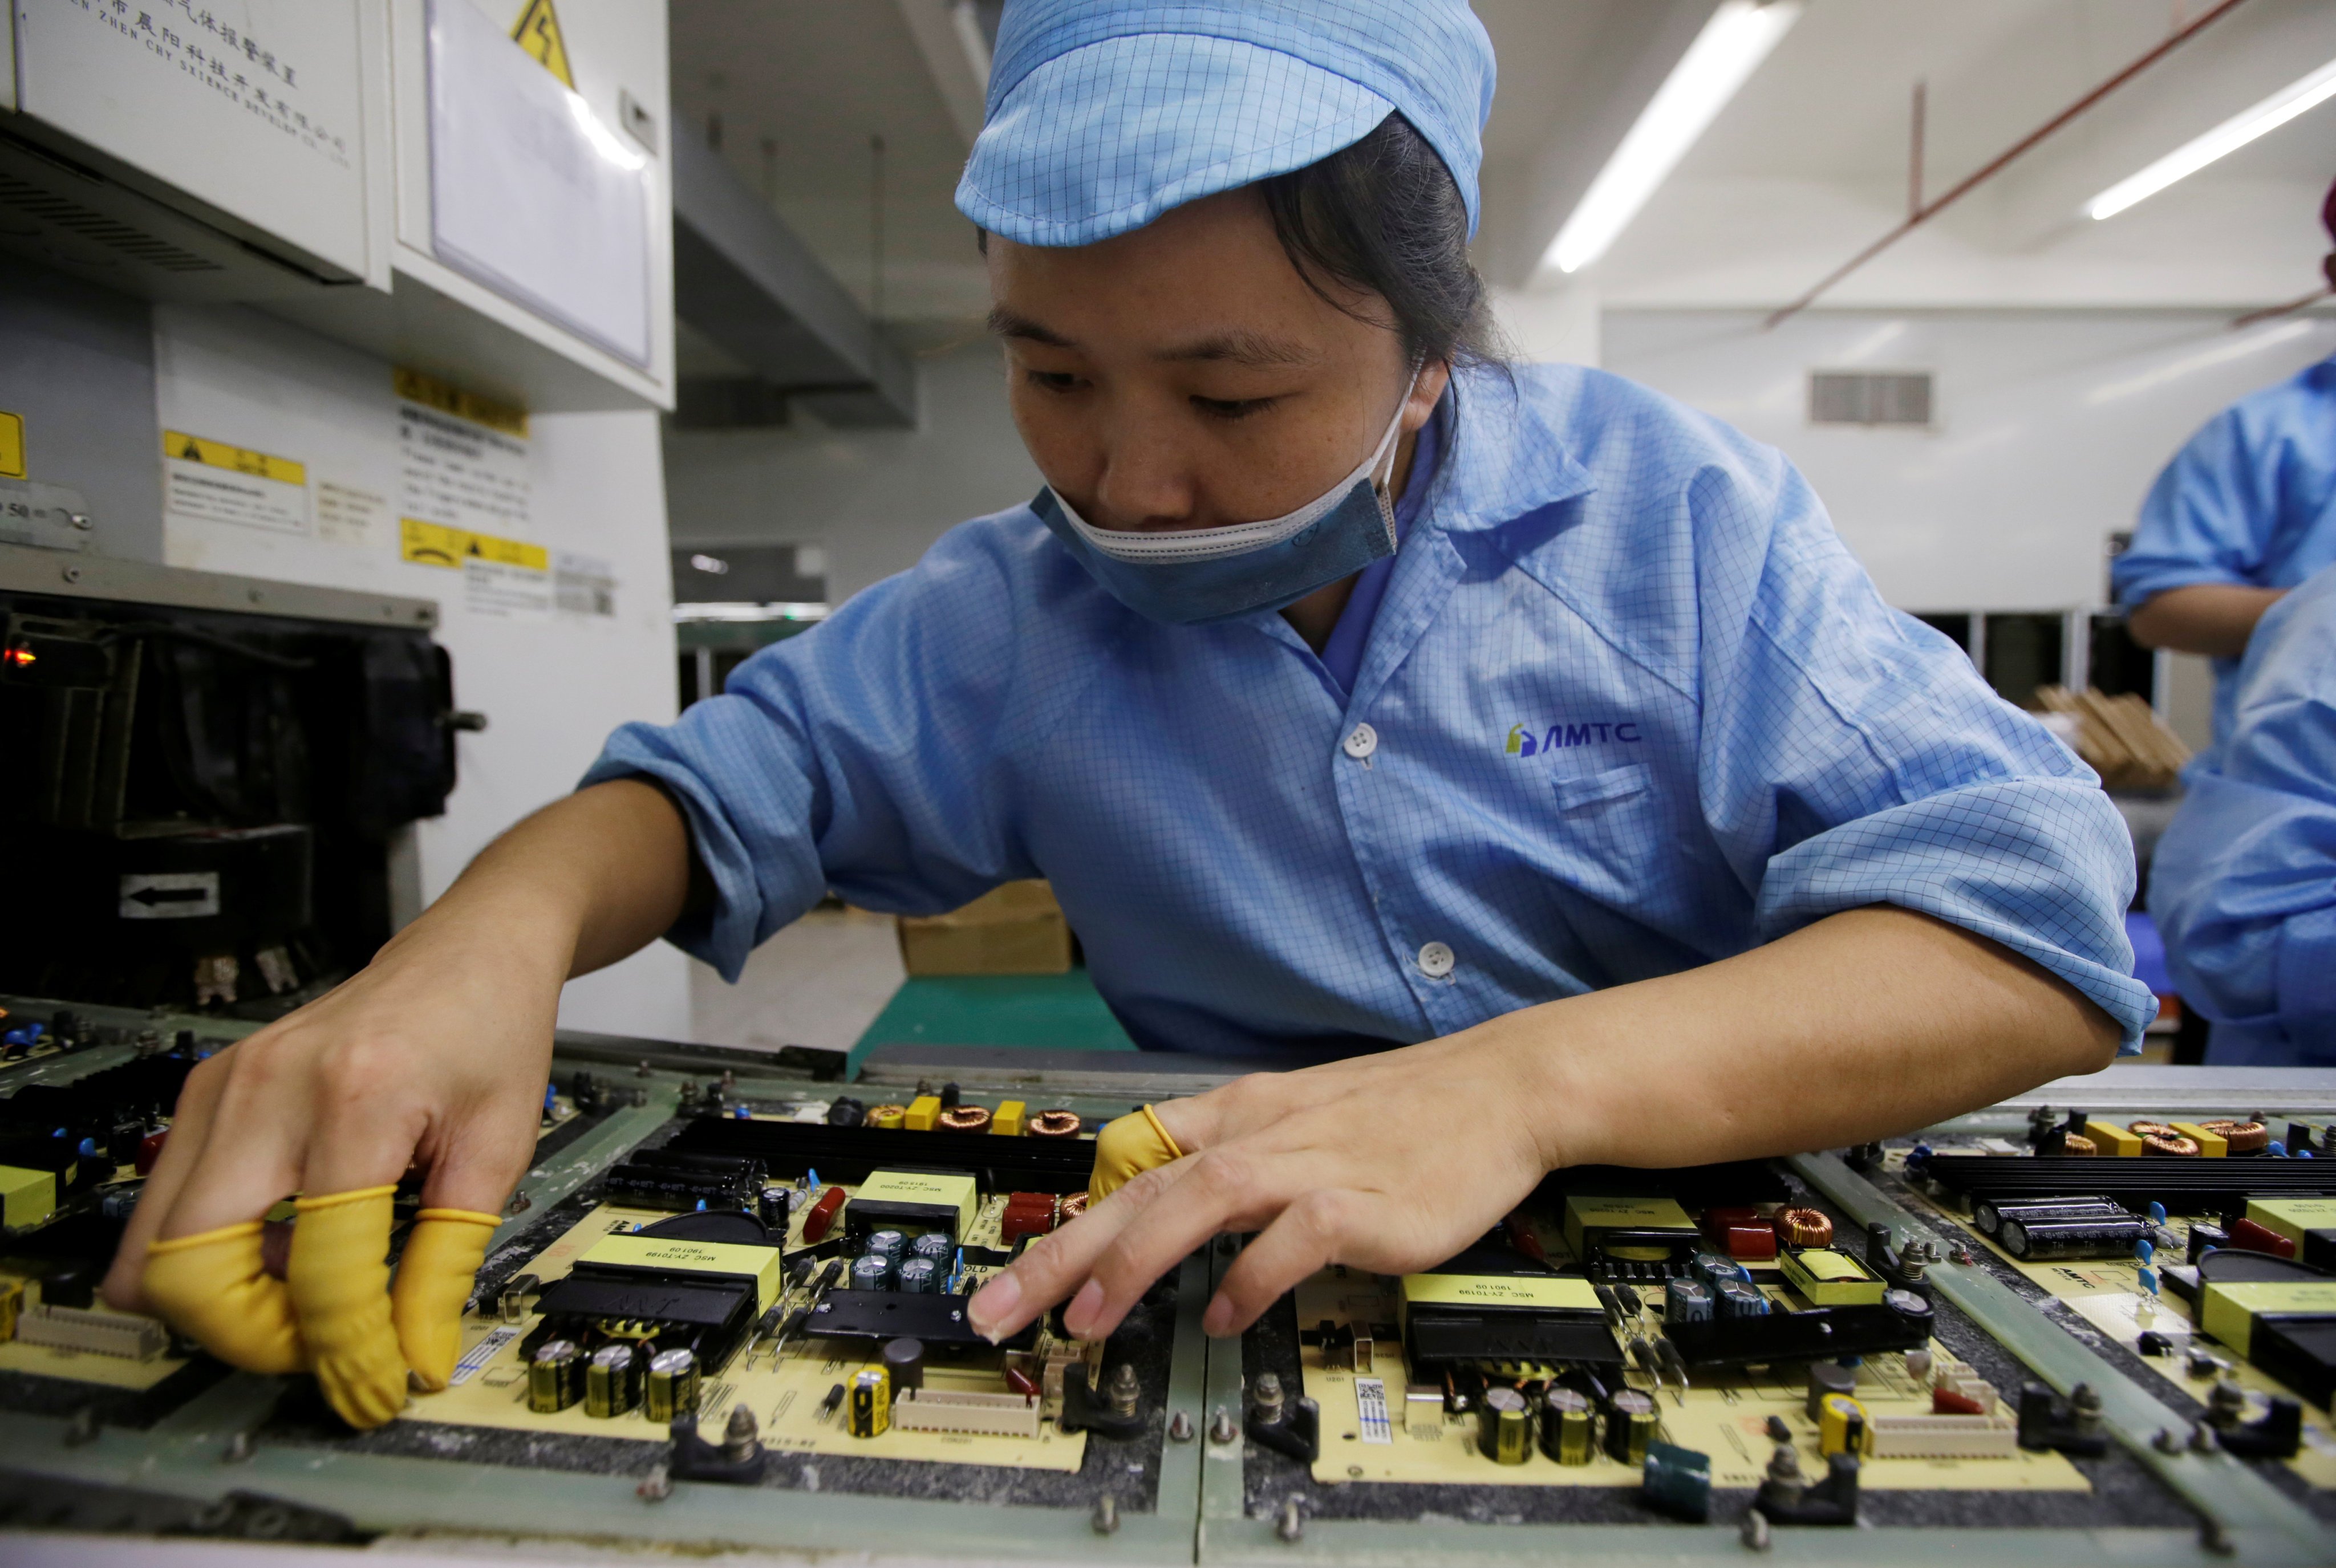 An employee works on the production line of a television factory in Shenzhen. Photo: Reuters